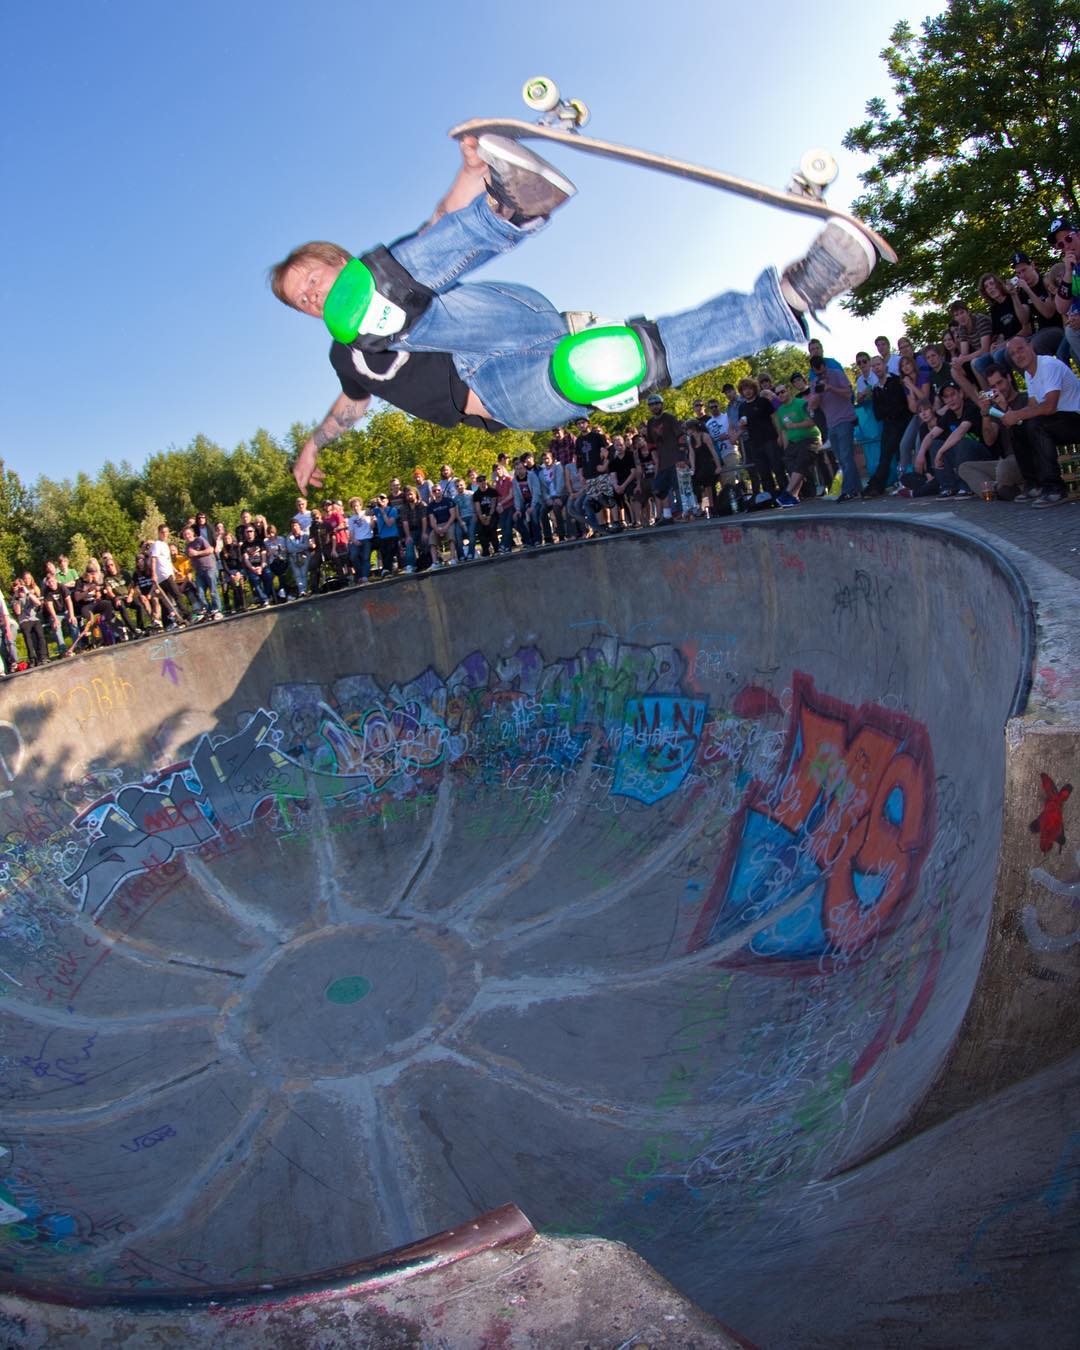 #throwbackthursday Anders Tellen blasting an air to fakie over the original #monsterbowl at the very first Bergfest 2009. Save the date for this years Bergfest - July 8th!!! #bergfest #bergfidel #monsterbowl #skatepark #kolossskateboards #minusramps #bailgun #gerdrieger.com